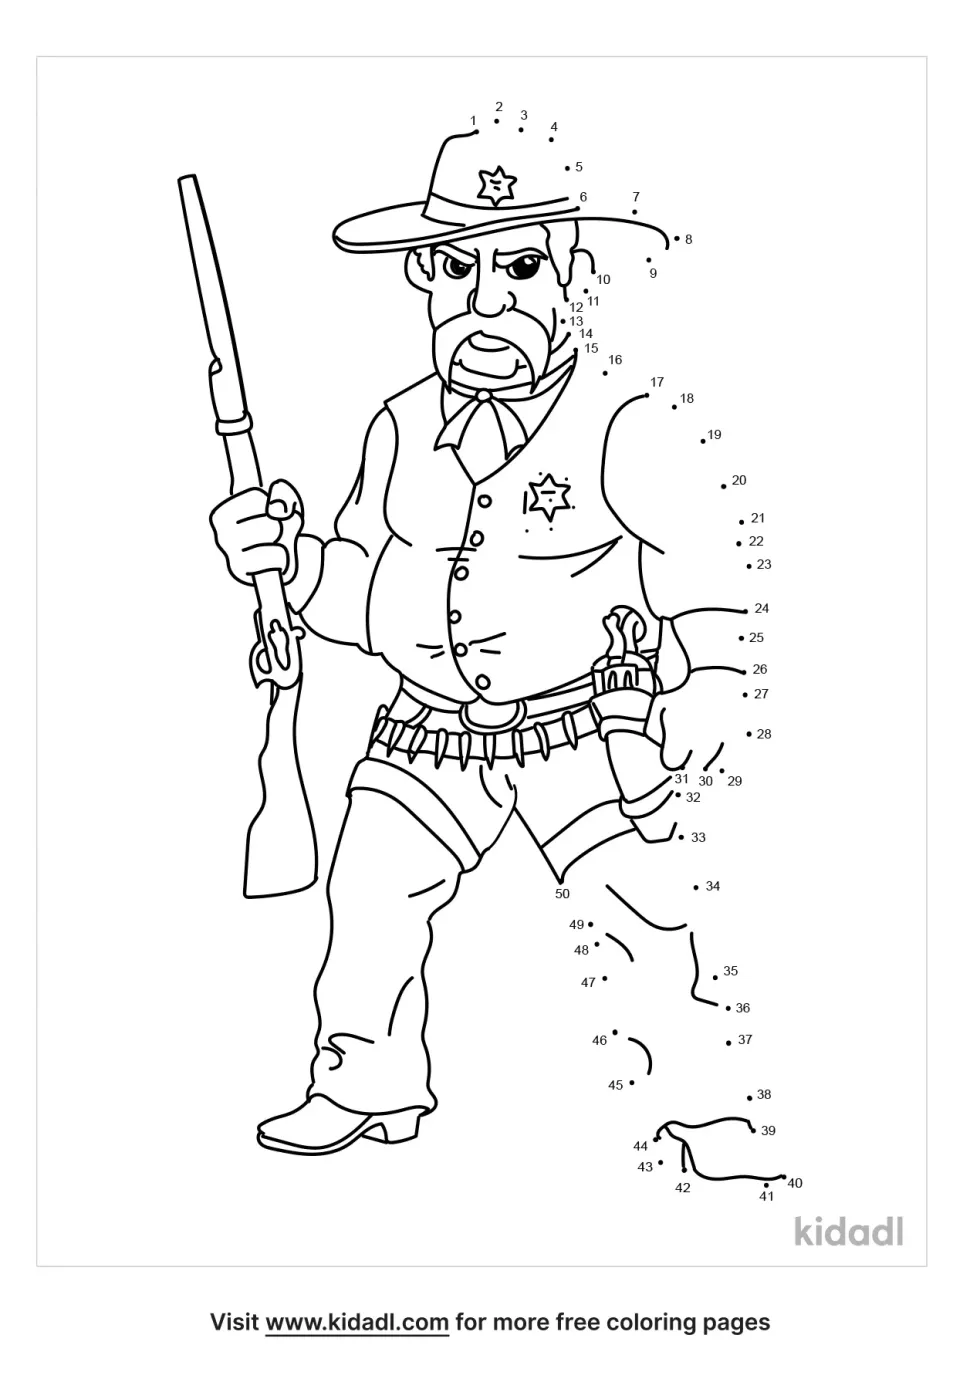 Old West Sheriff